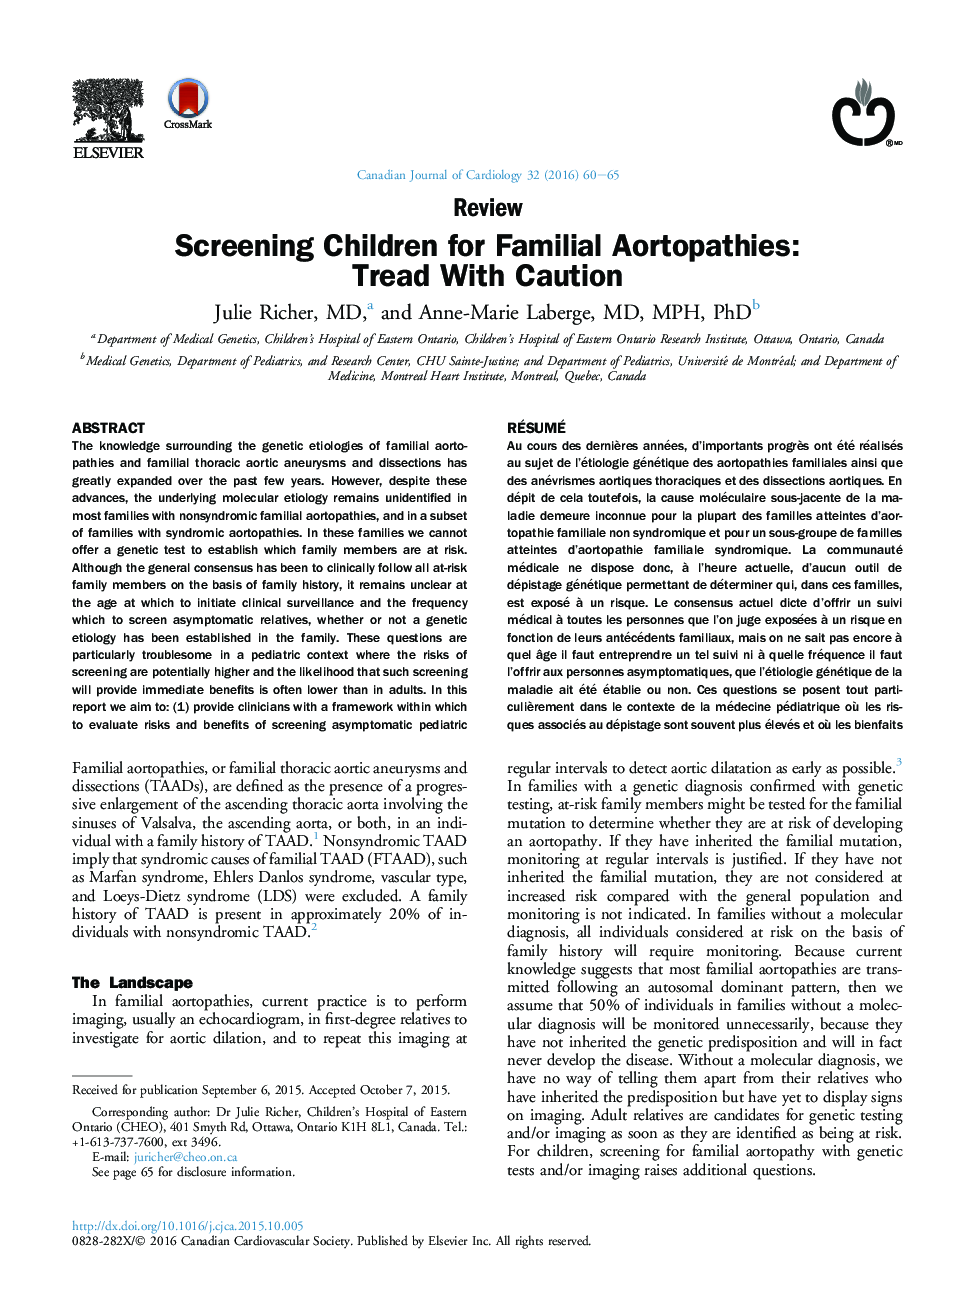 Screening Children for Familial Aortopathies: Tread With Caution 